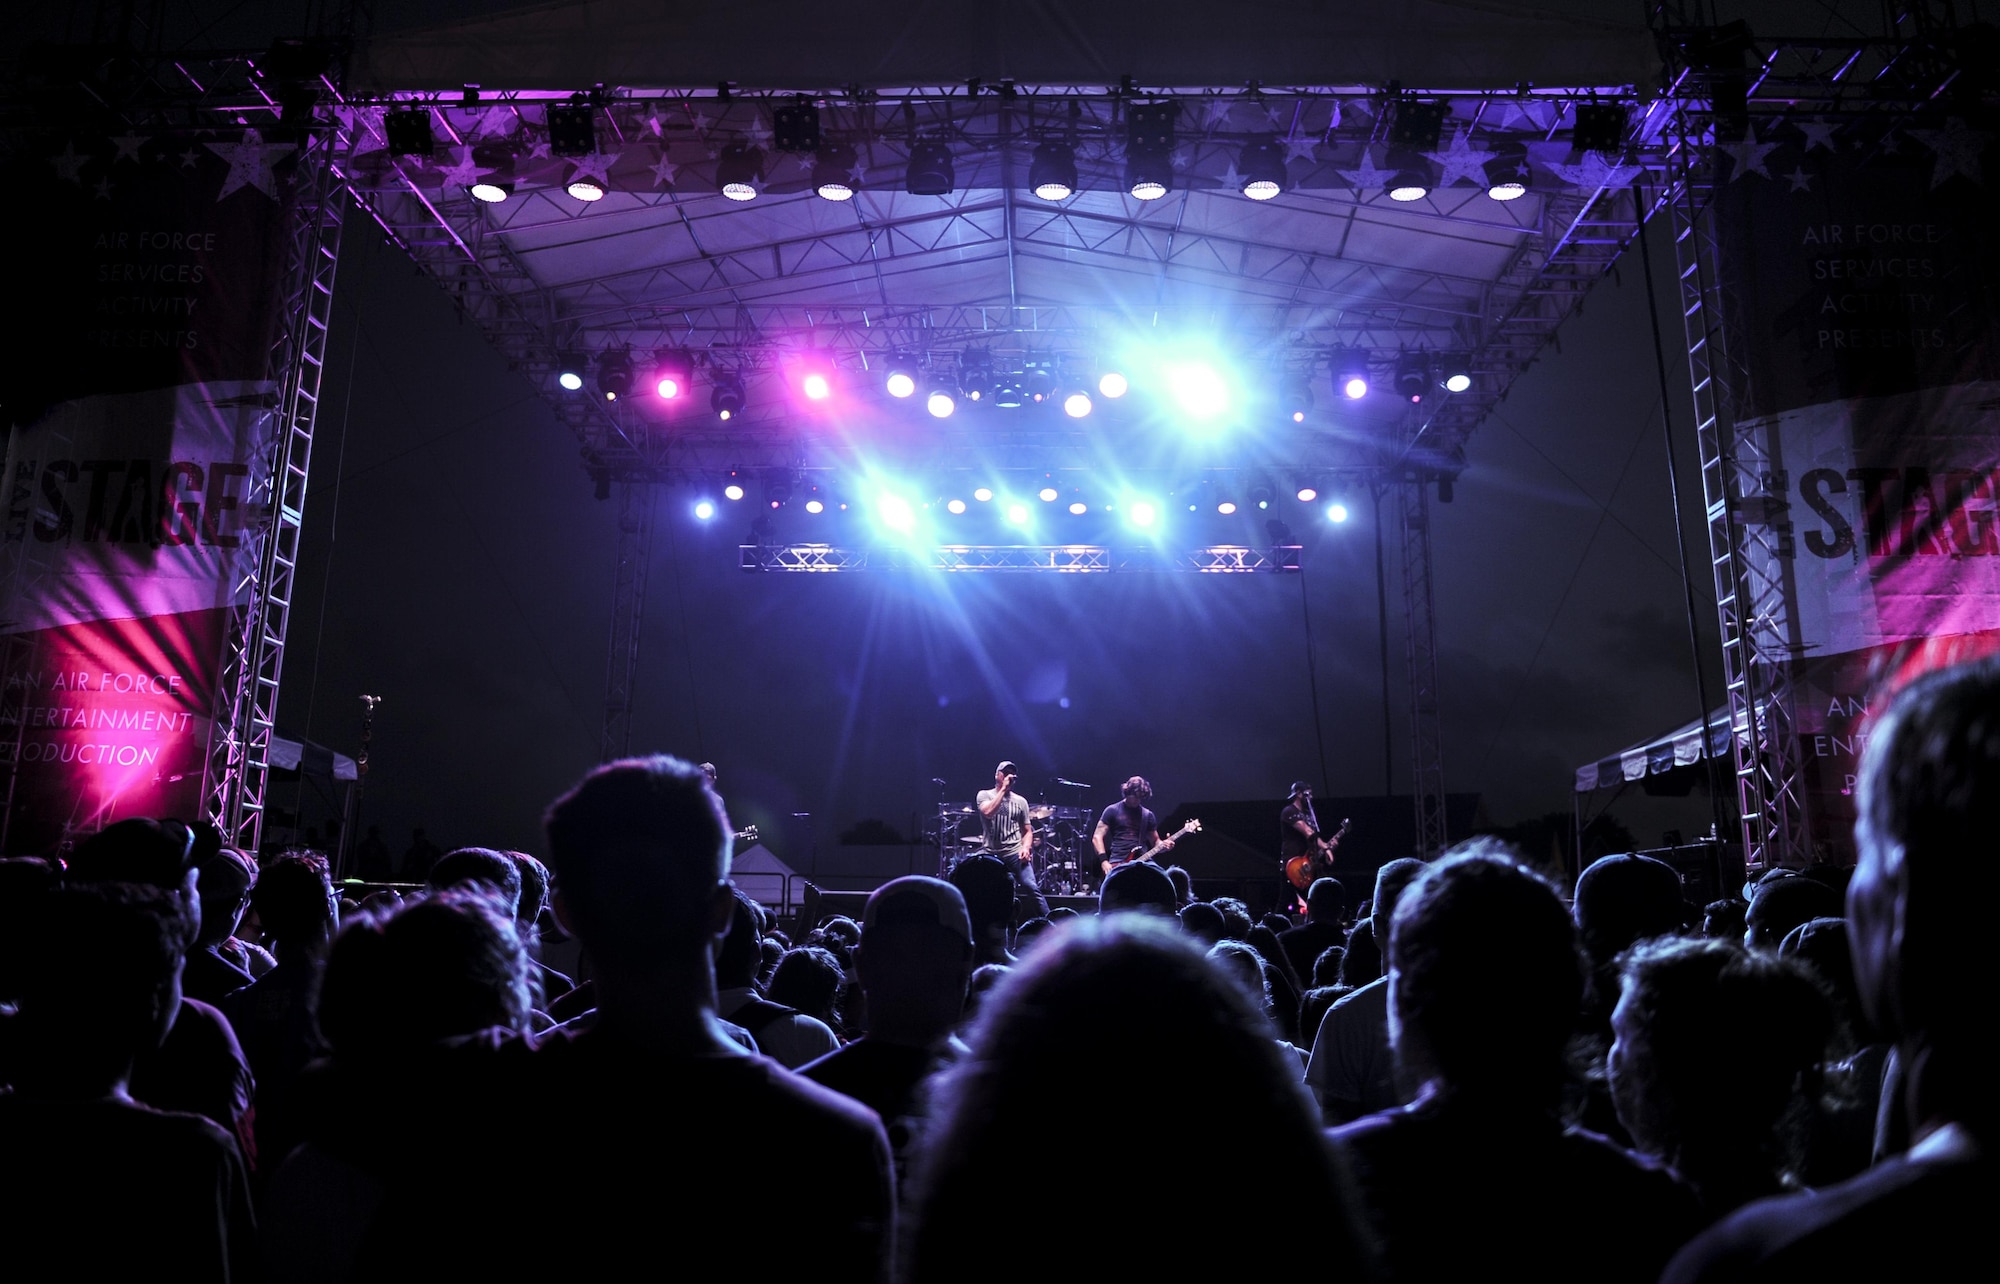 Rock band 3 Doors Down performs during Freedom Fest at Hurlburt Field, Fla., June 24, 2017. Events like Freedom Fest are designed to build resilience at Hurlburt Field, the most deployed base in the Air Force, by focusing on family and friends while celebrating our nation’s independence. (U.S. Air Force photo by Airman 1st Class Dennis Spain)